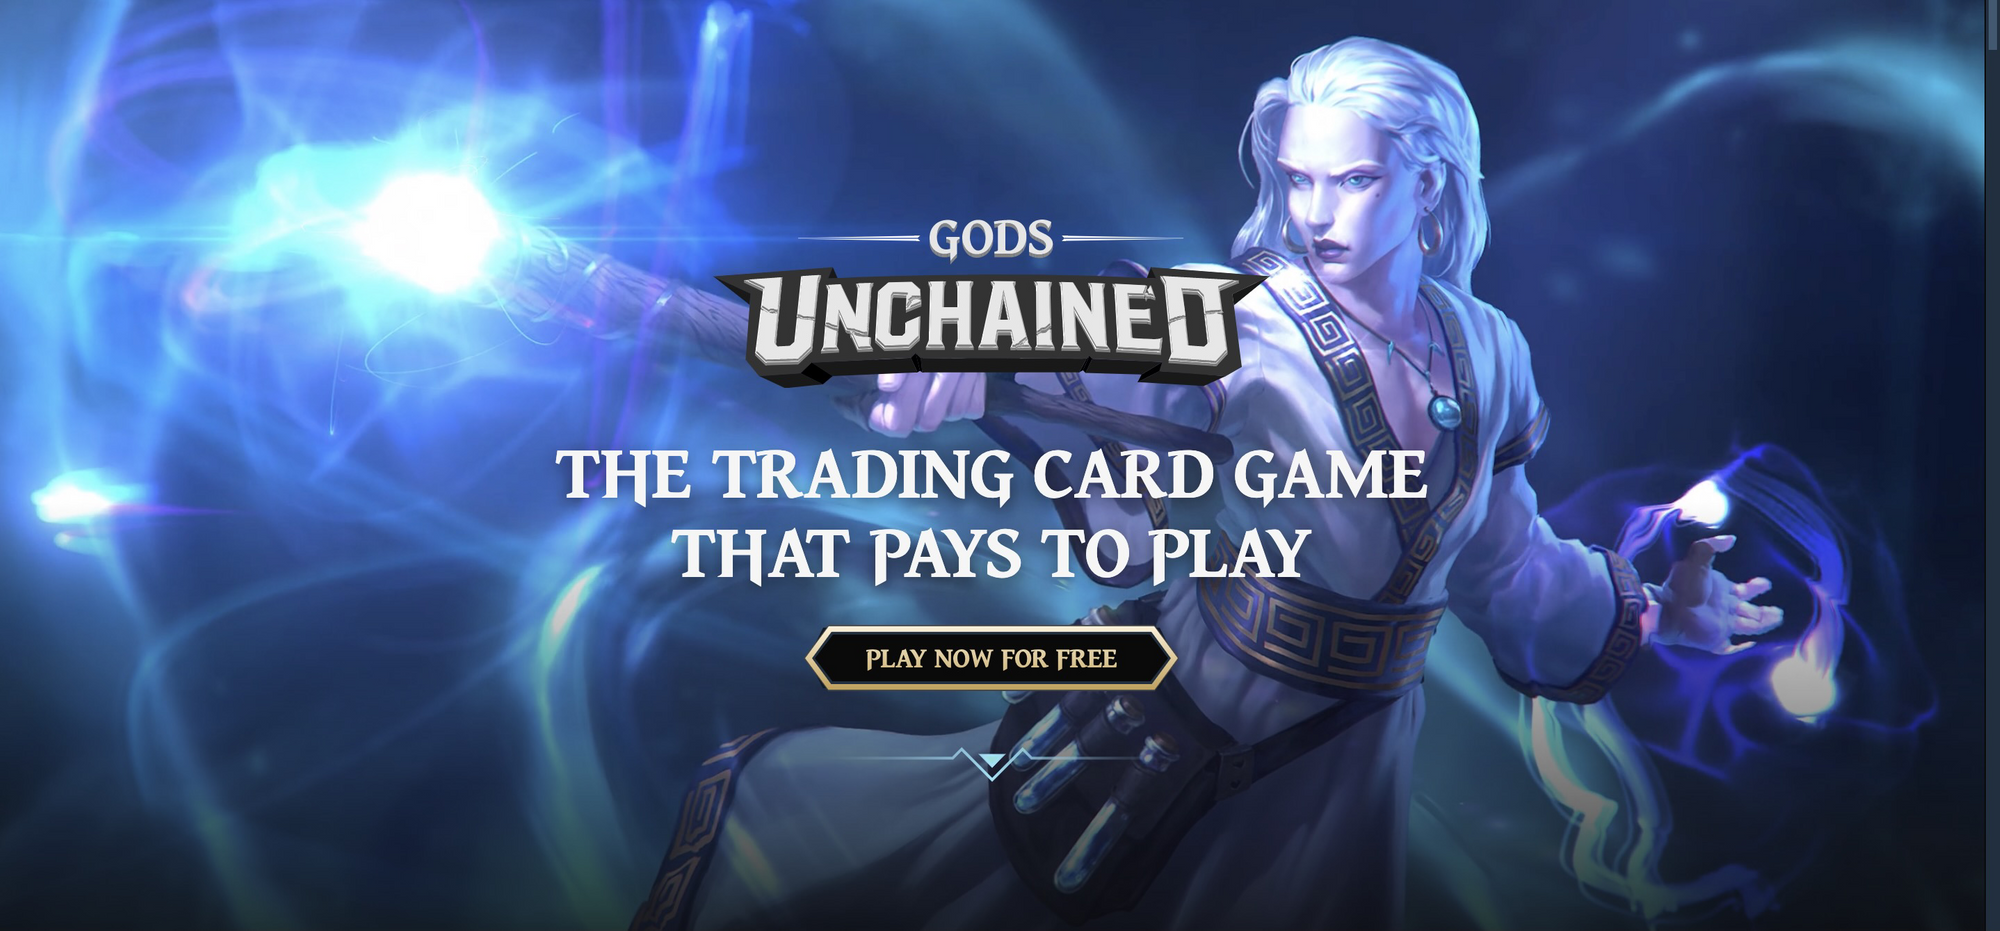 Gods unchained blockchain game